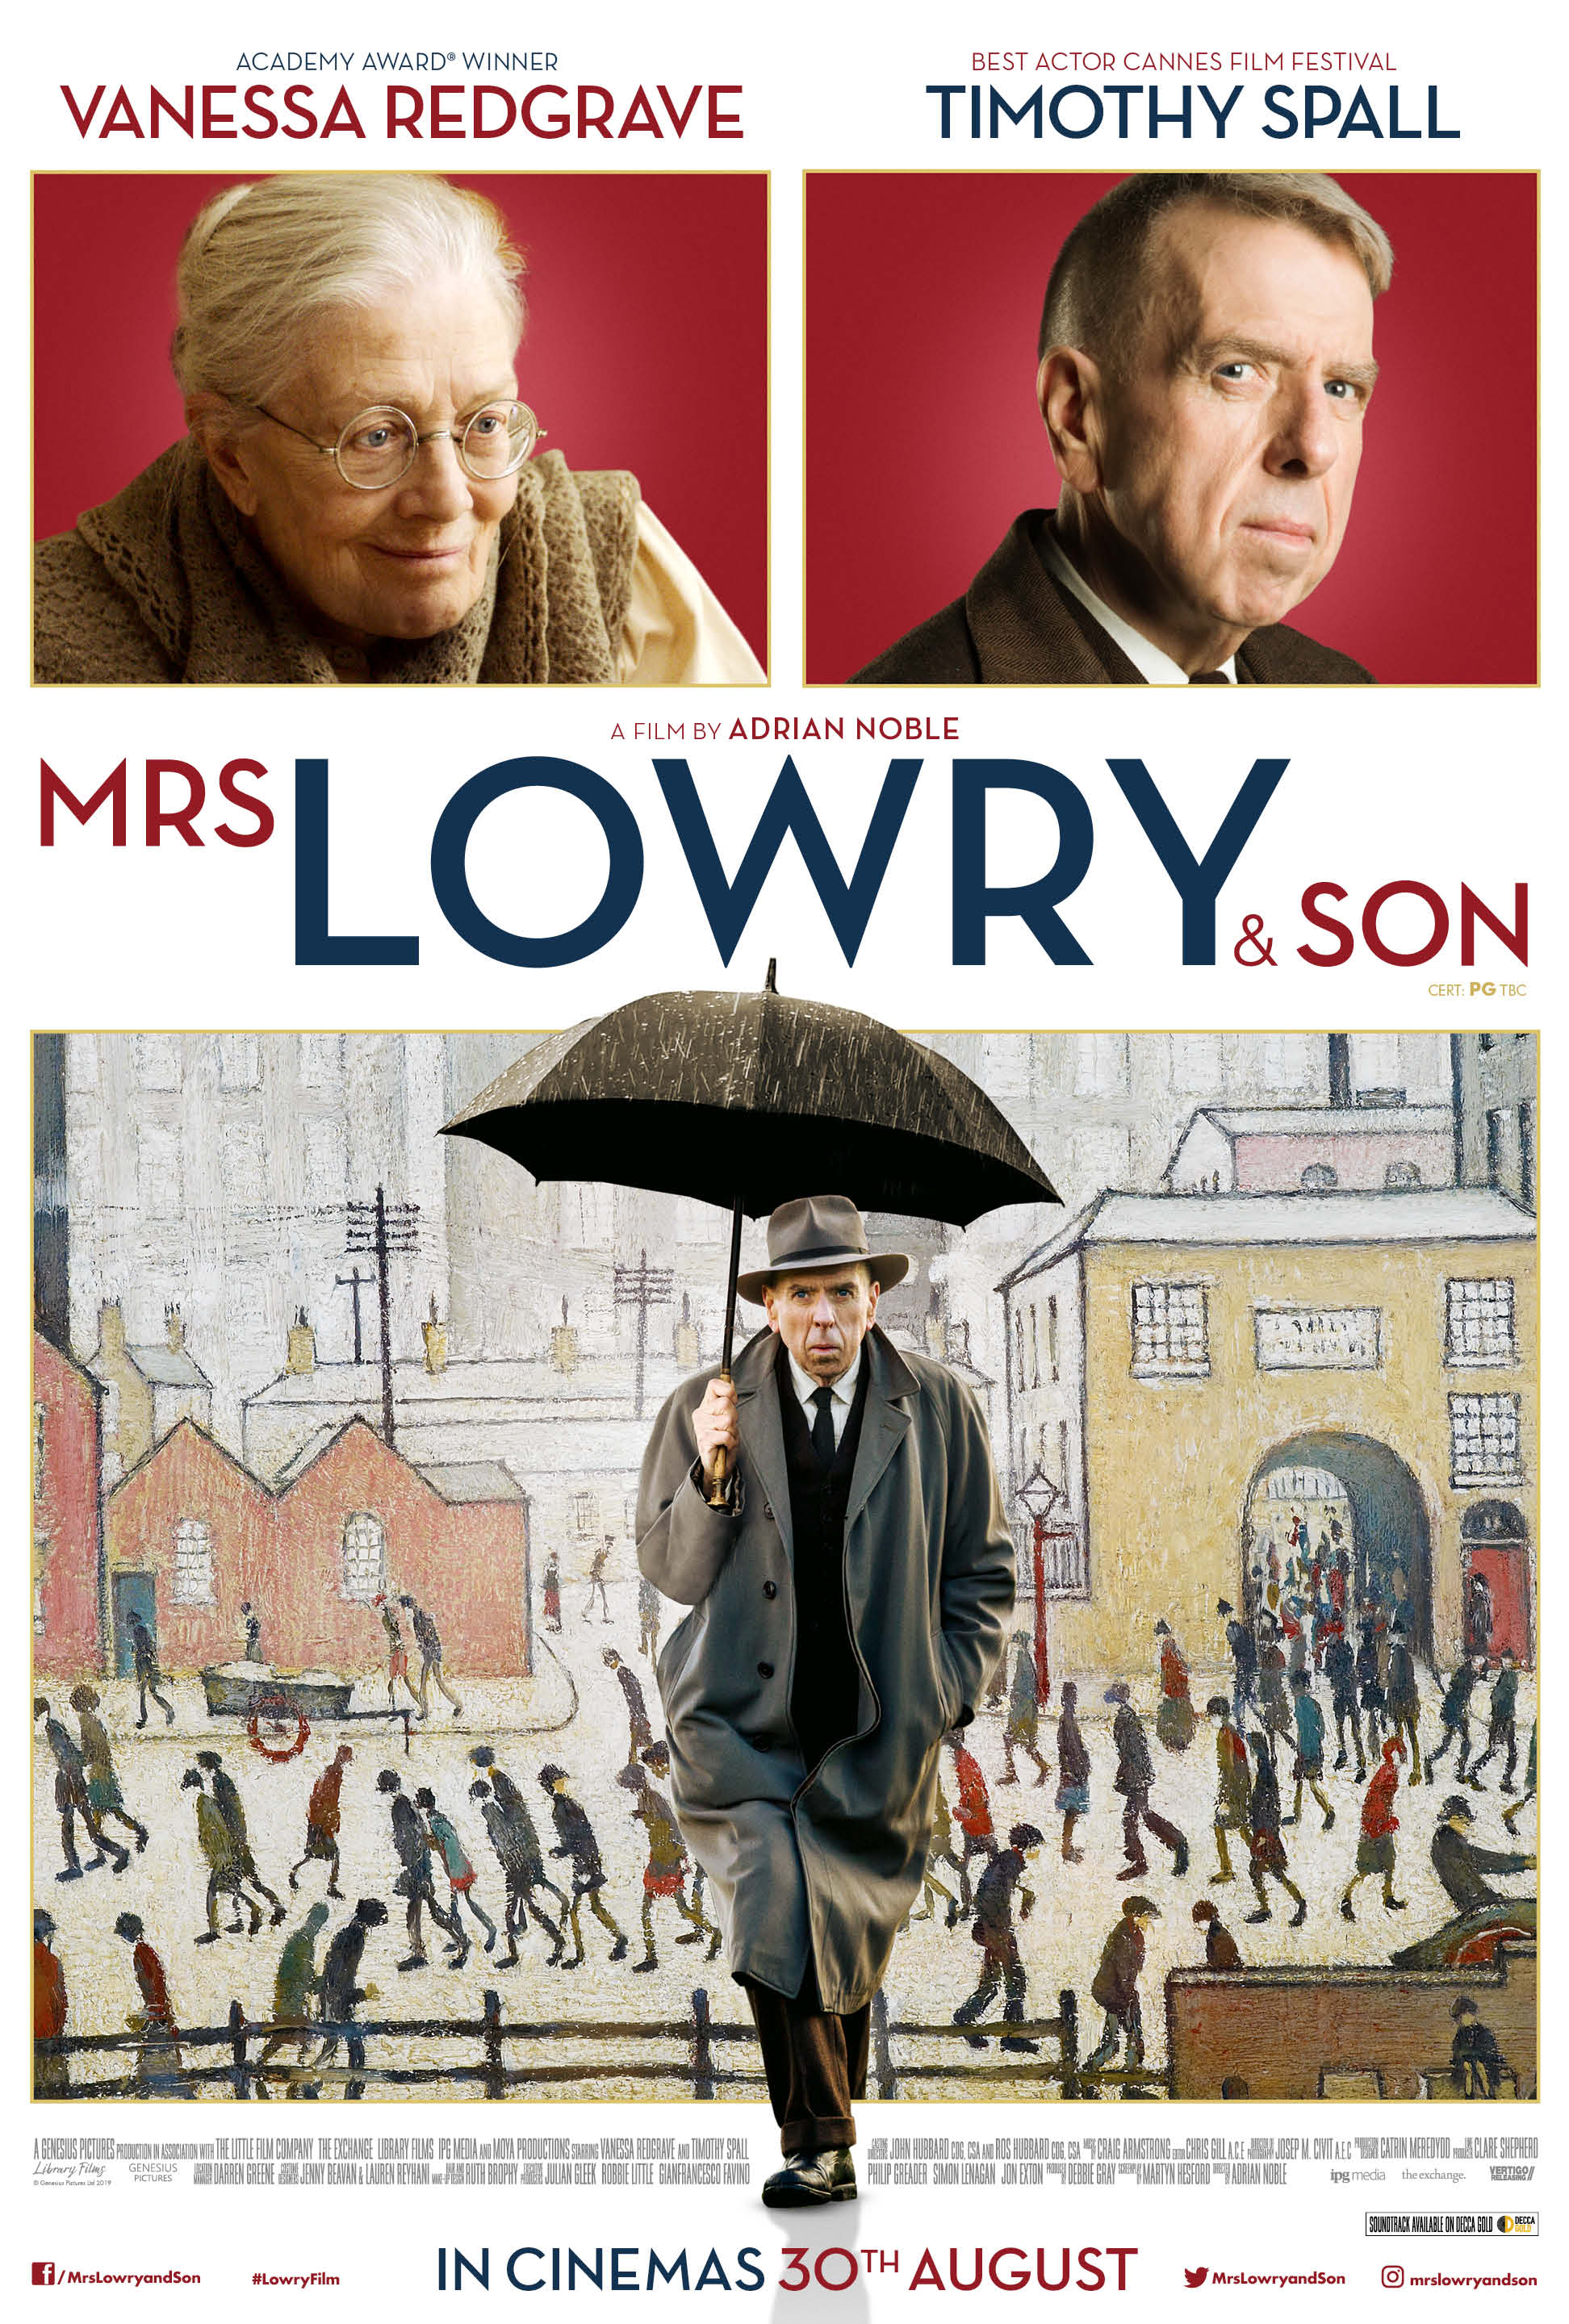 Mrs Lowry and Son Image